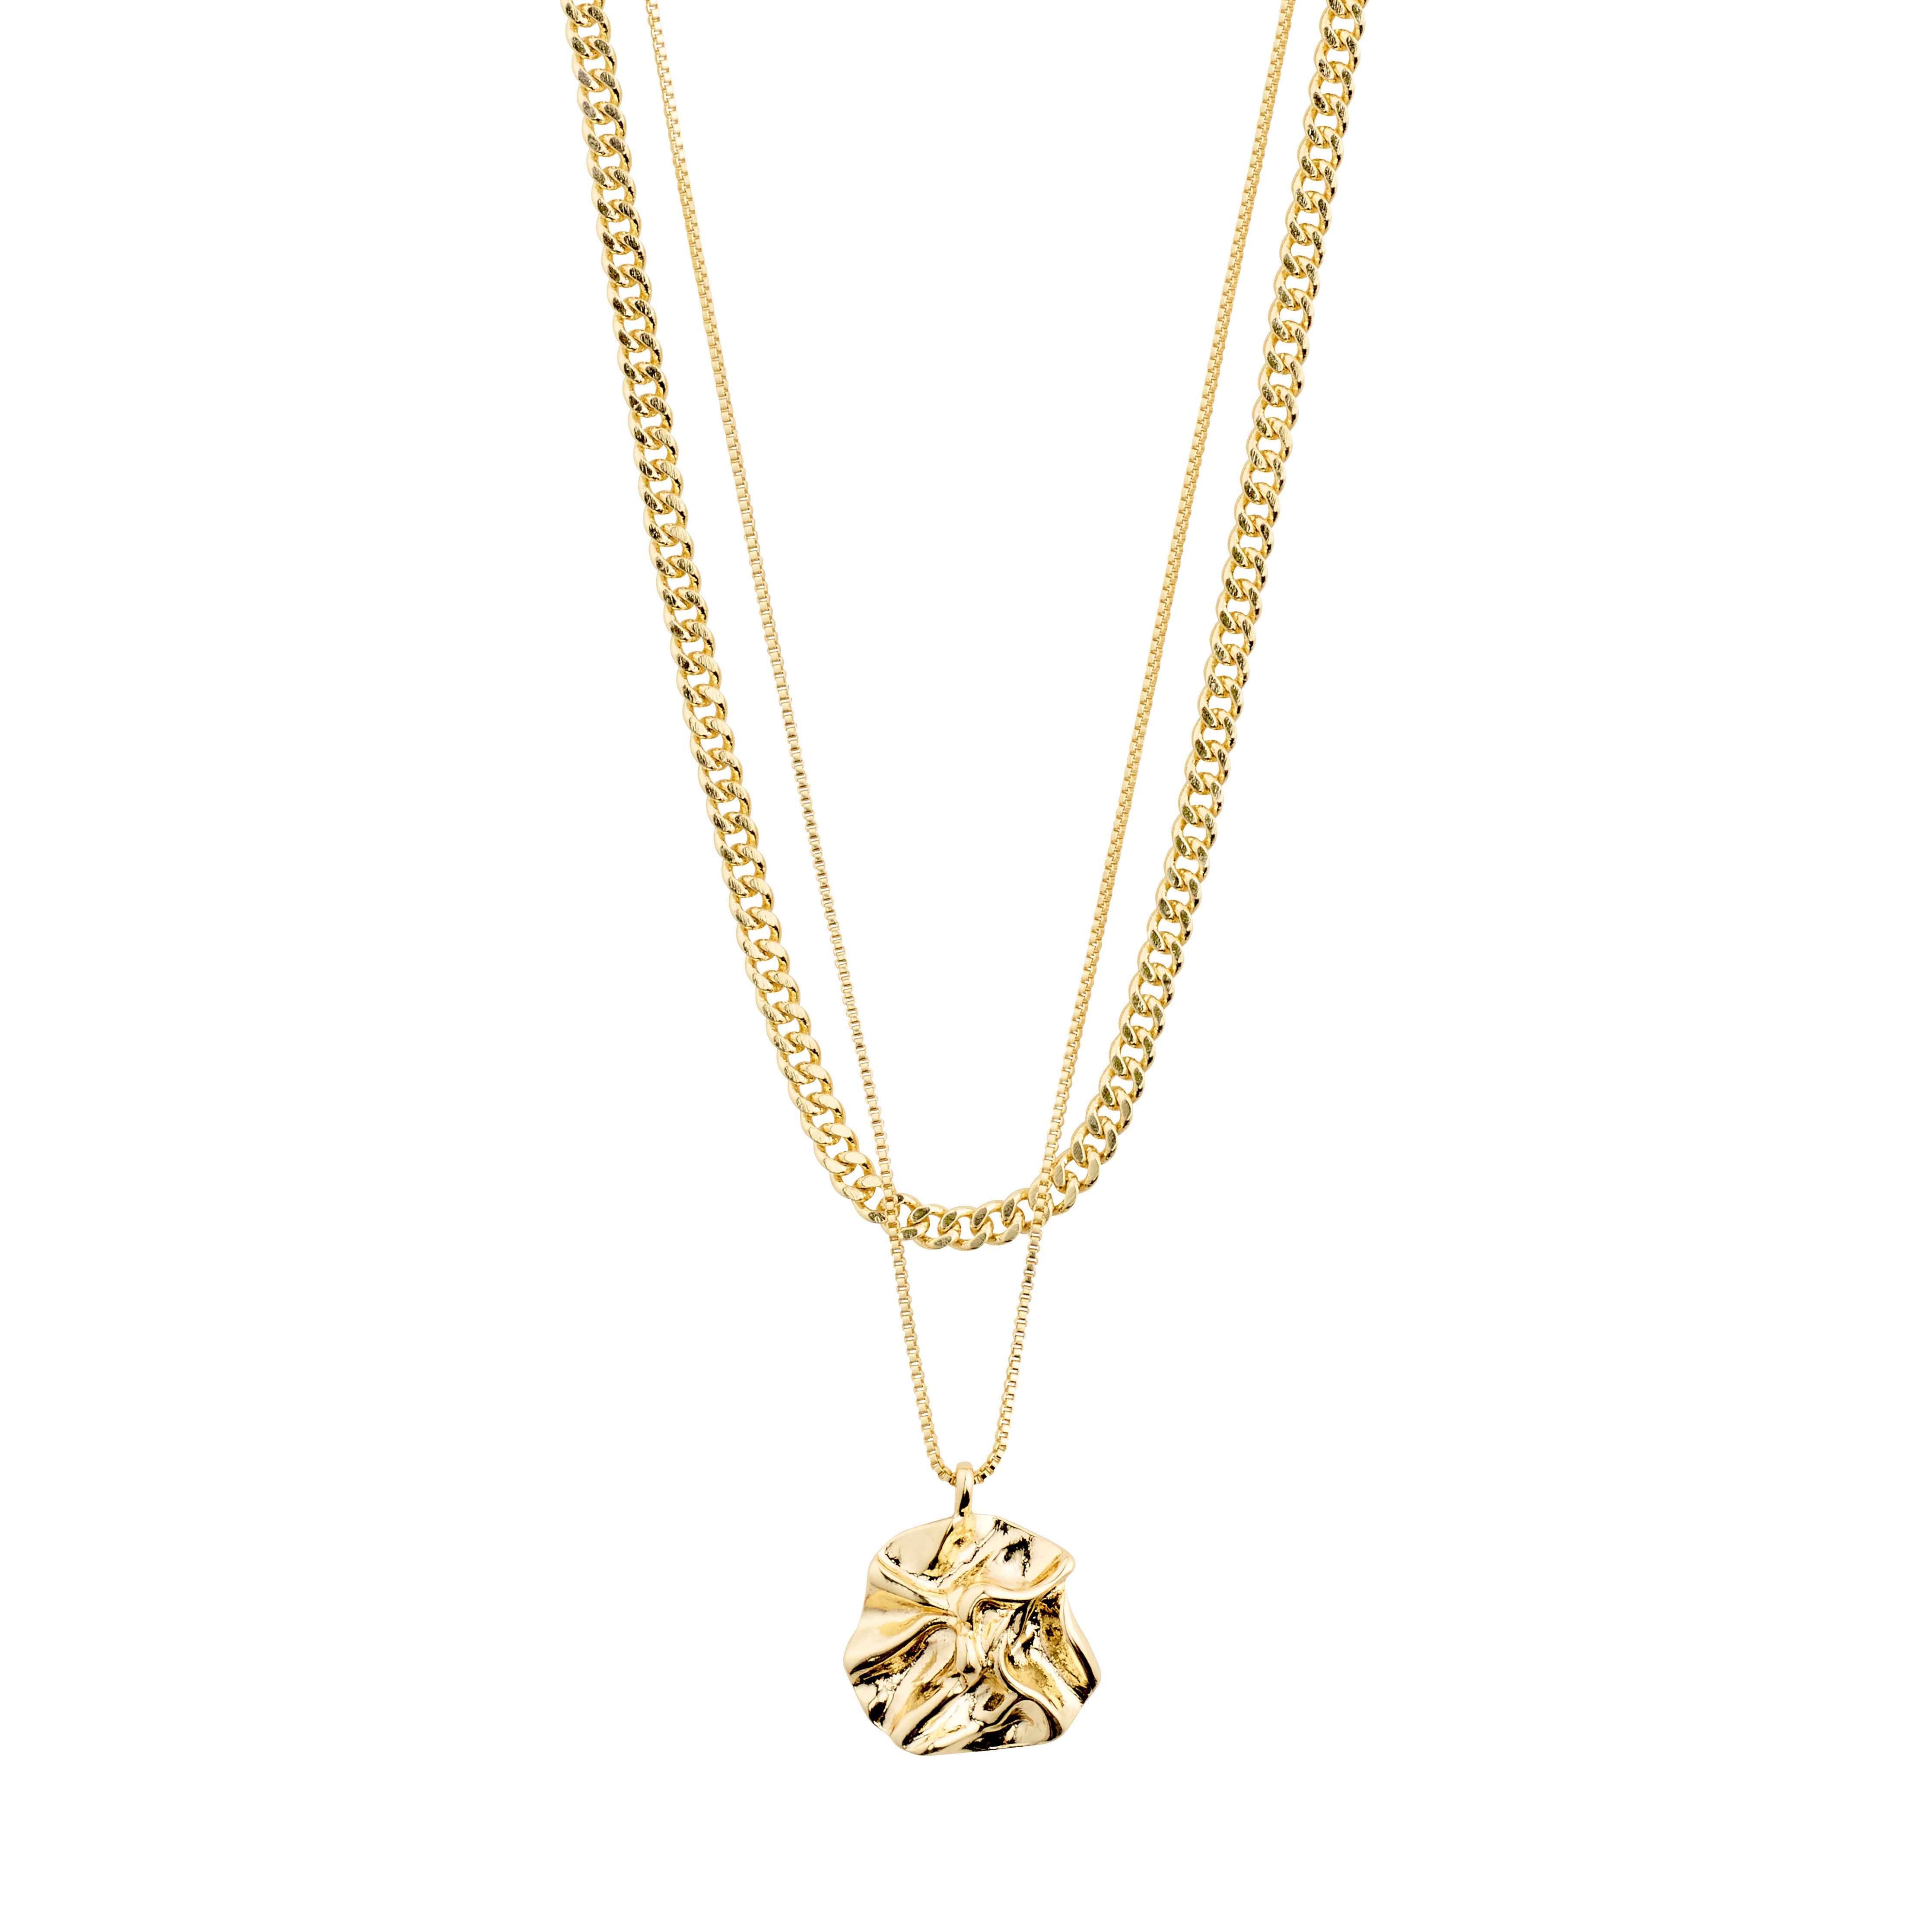 WILLPOWER curb & coin necklace, 2-in-1 set, gold-plated